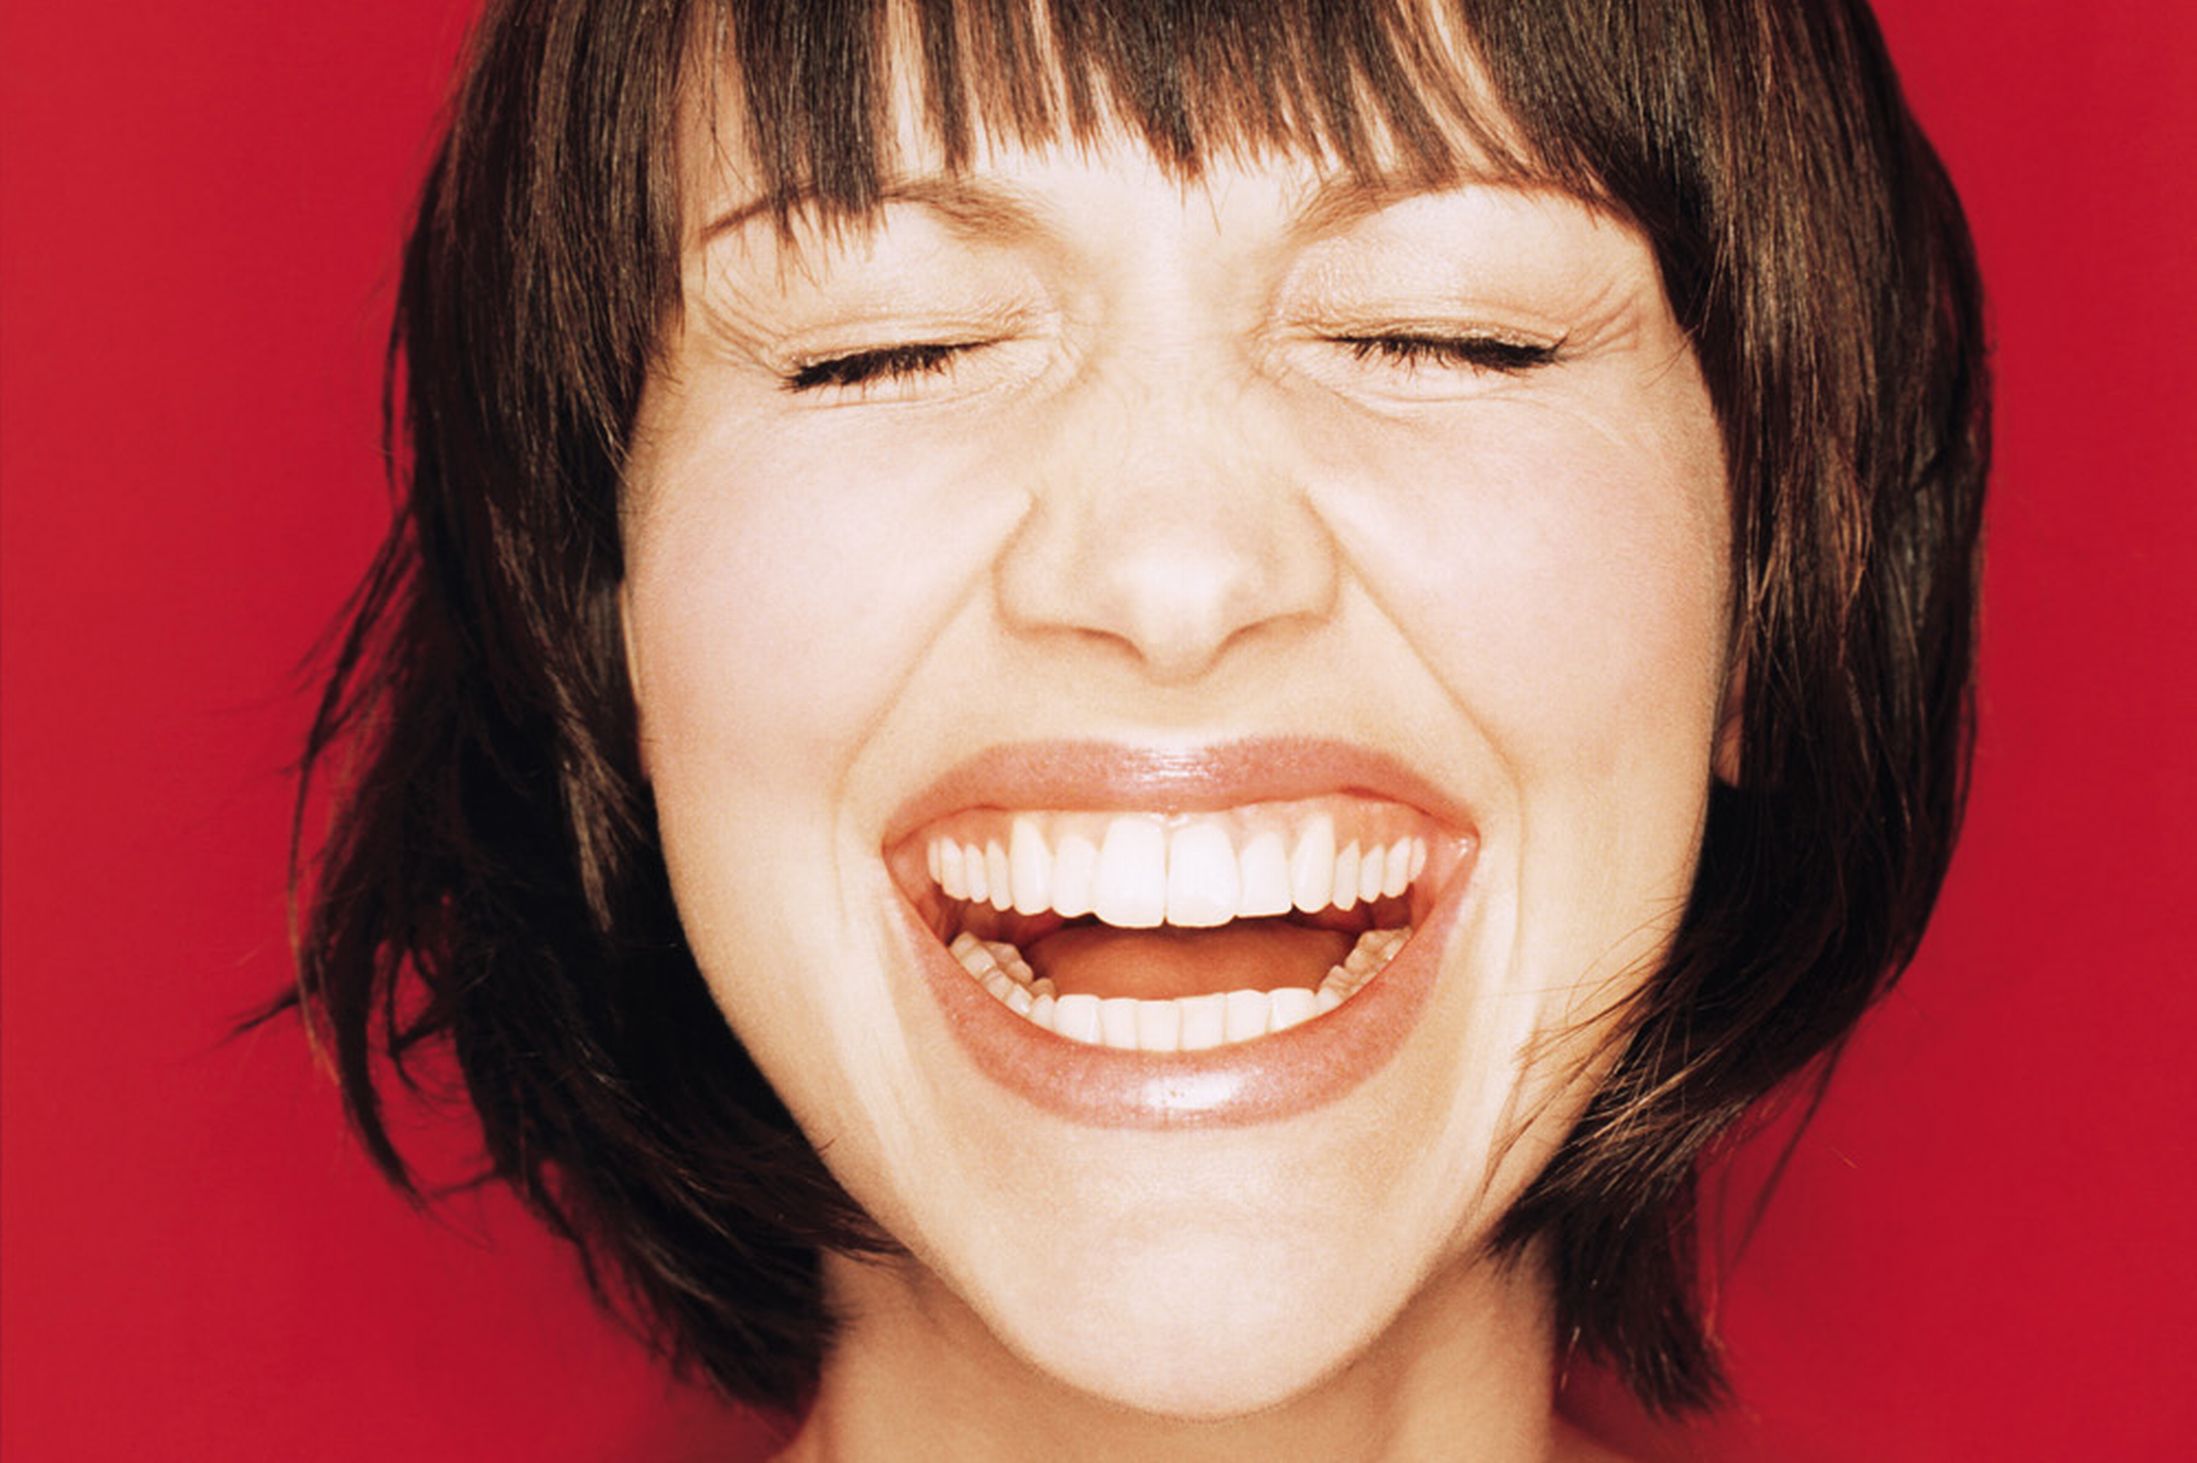 Female laughter photo